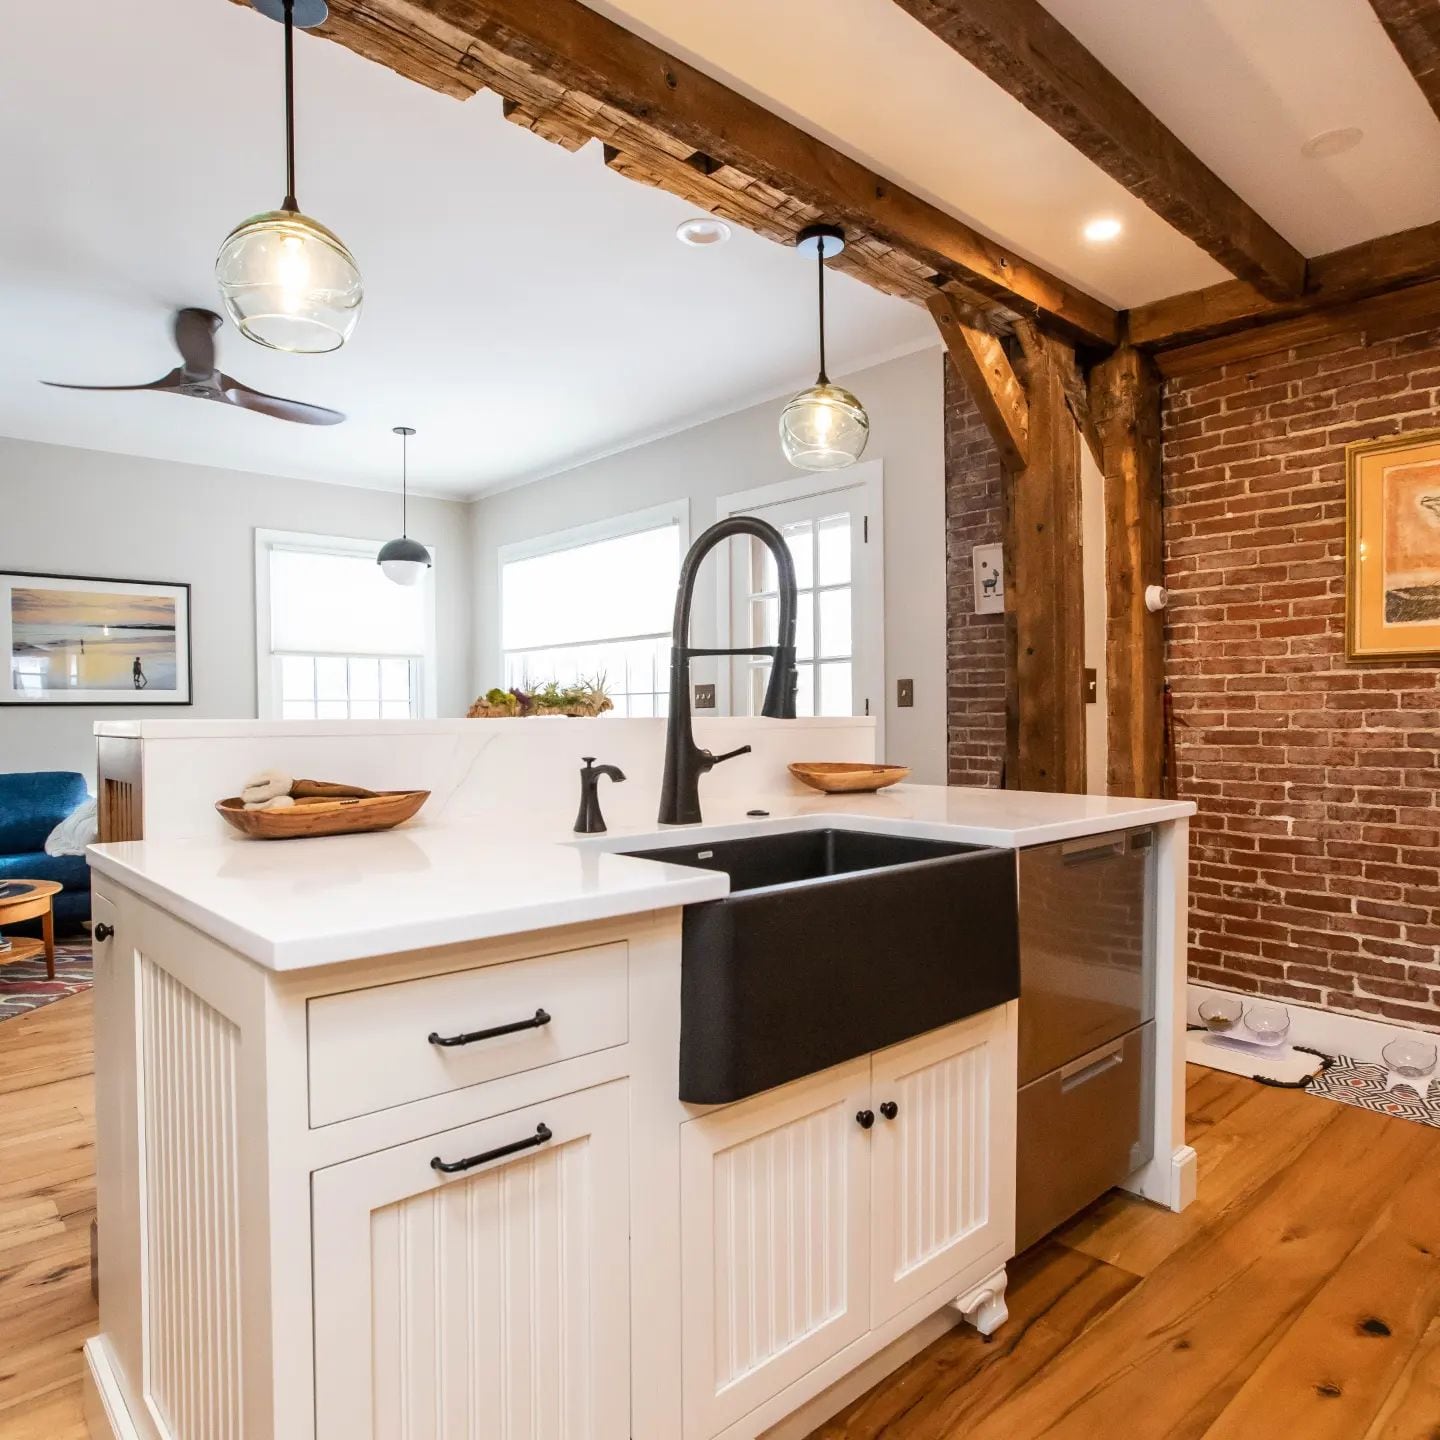 Big bright windows let light in to show off exposed brick